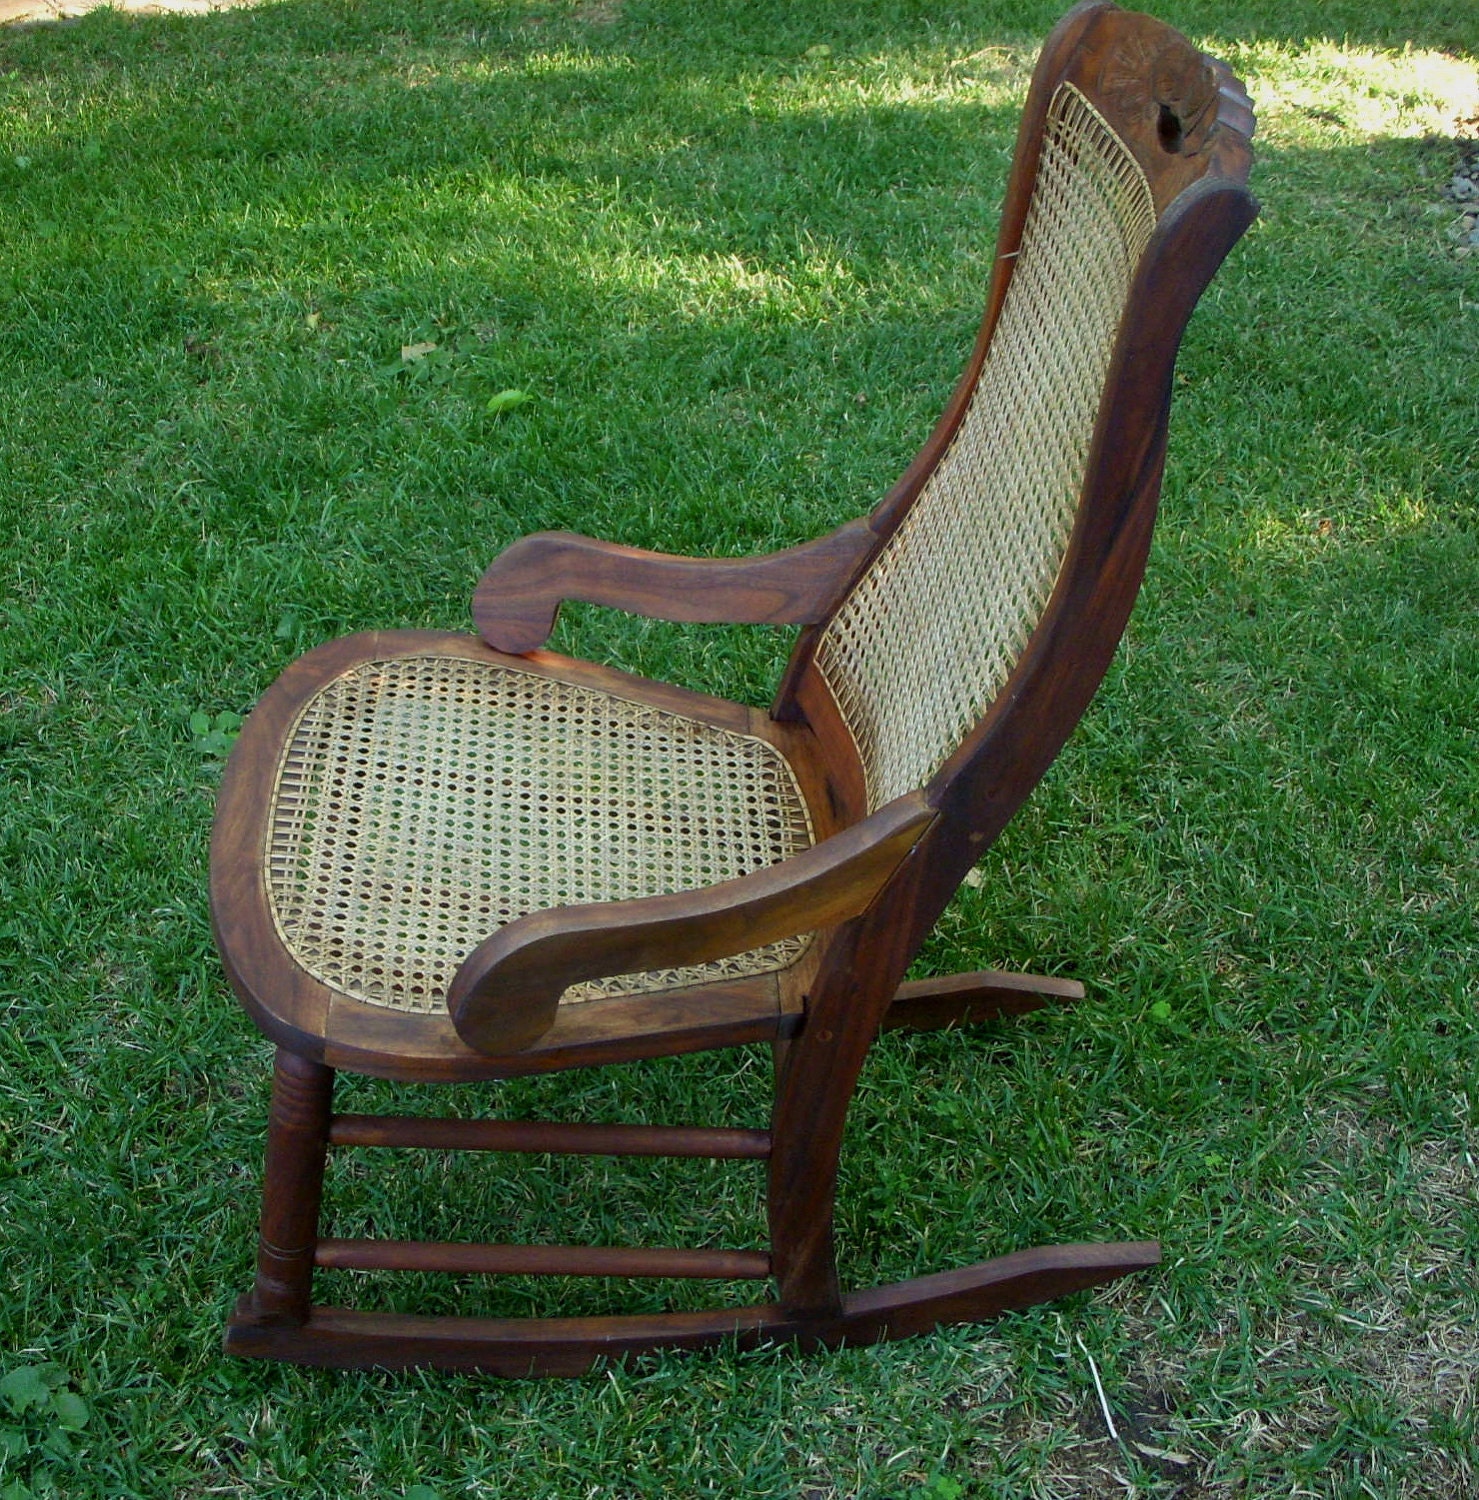 Antique Rocking Chair Wood and Cane Seat by honeystreasures